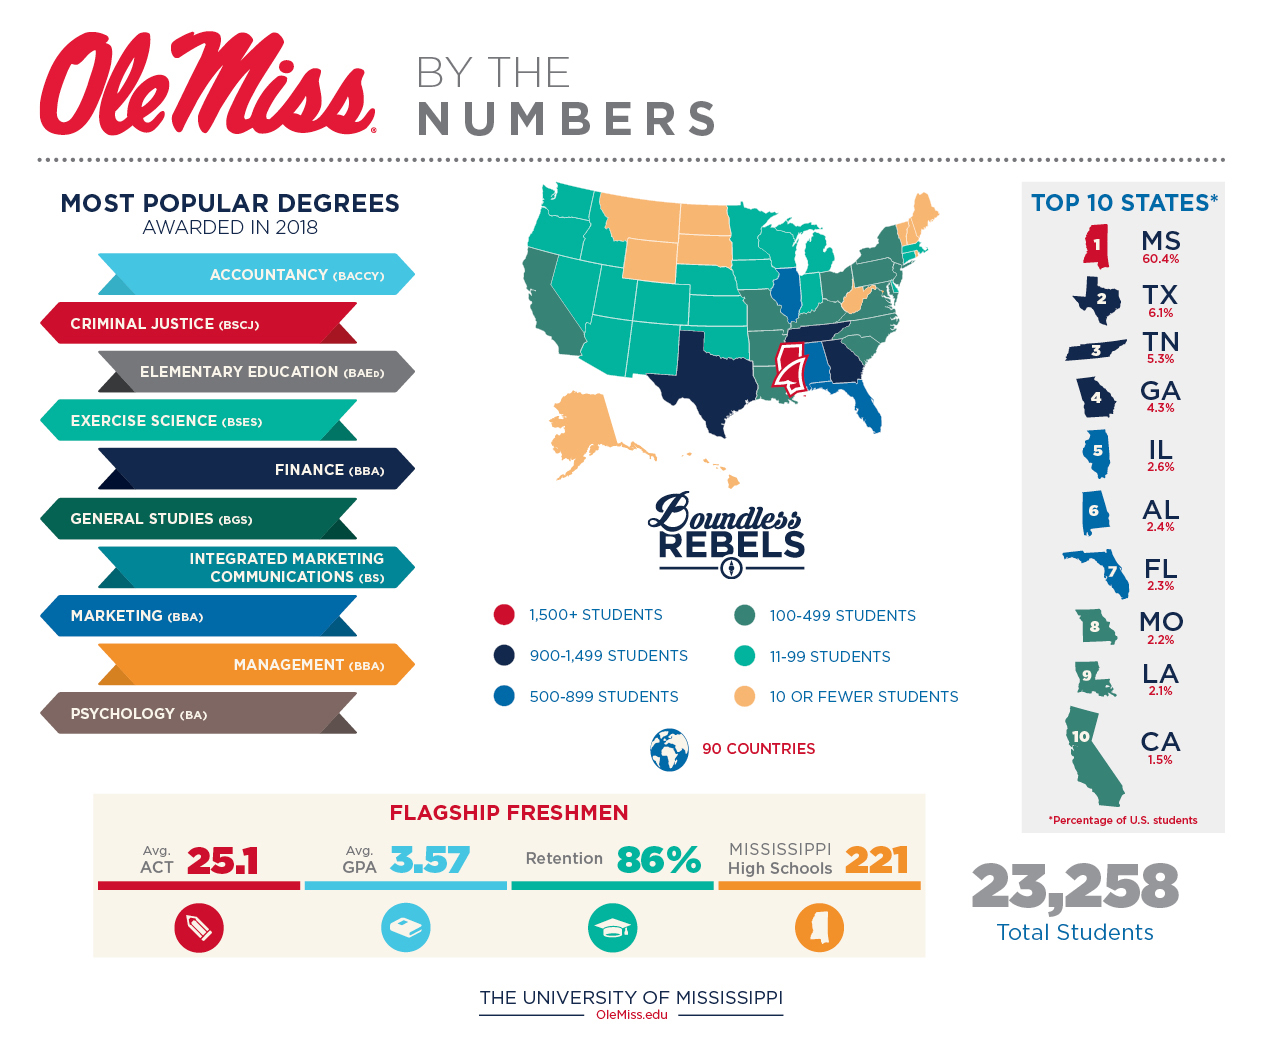 UM Welcomes New and Returning Students for Fall Semester - Ole Miss News